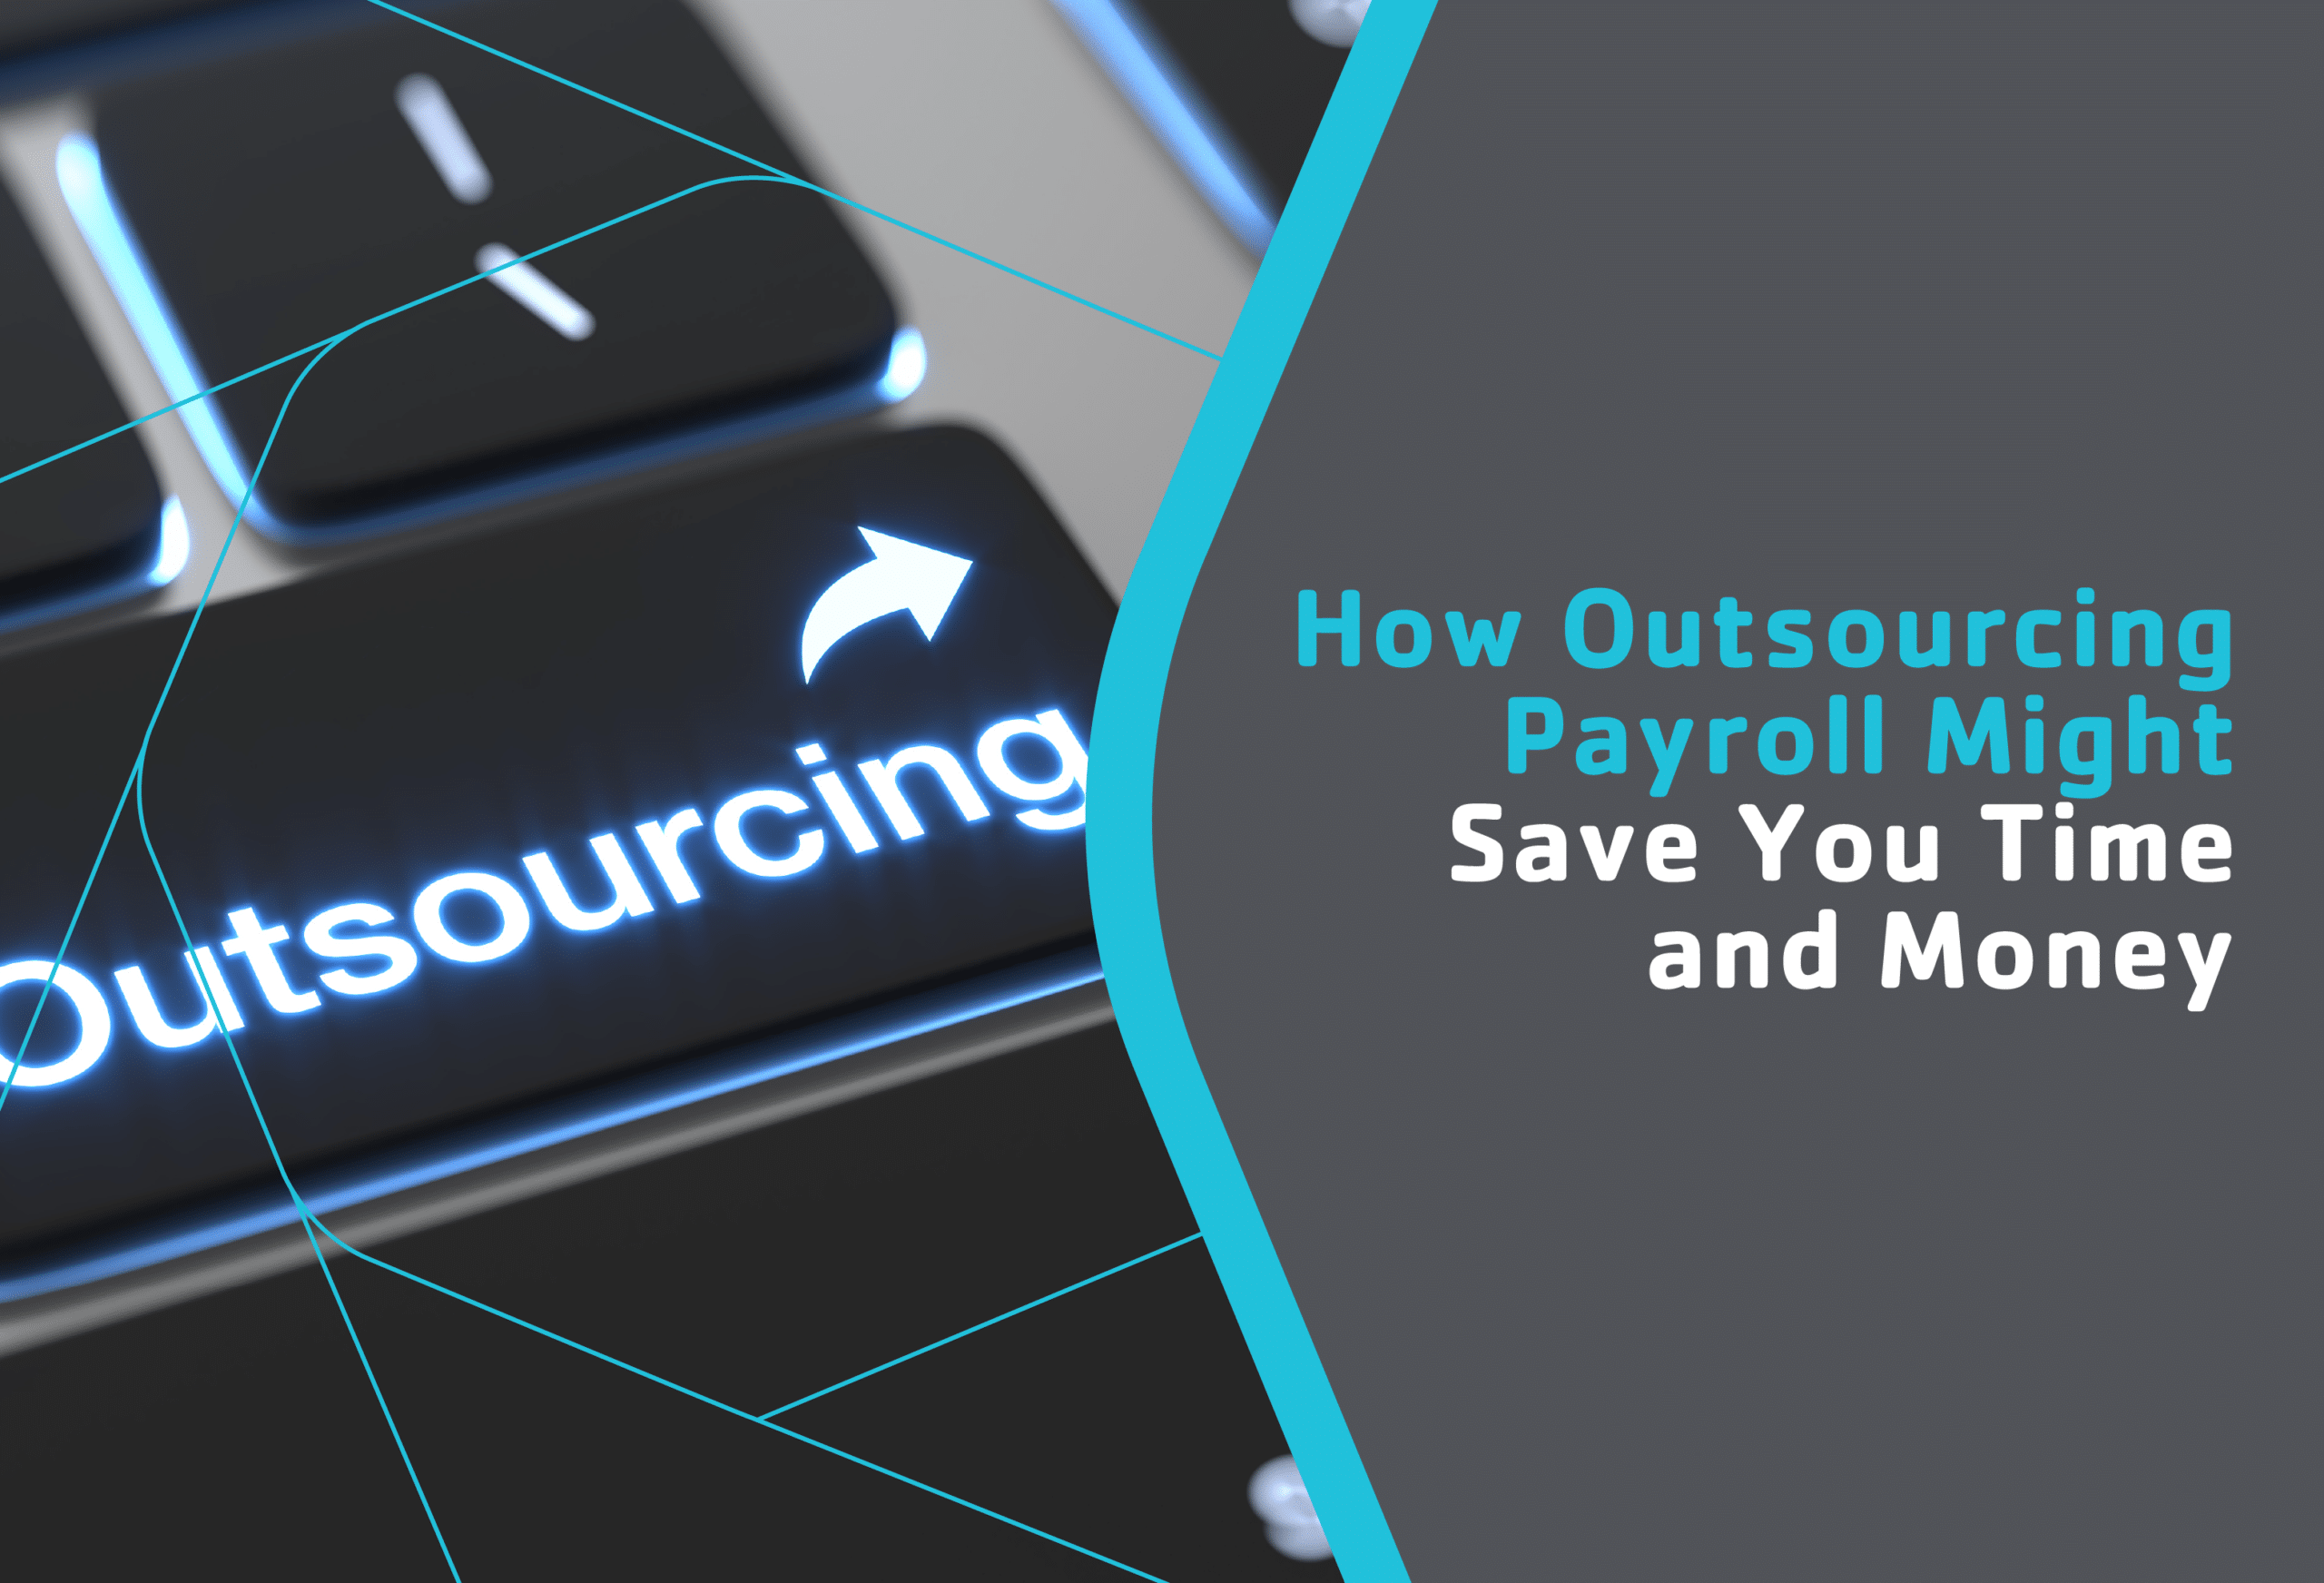 How Outsourcing Payroll Might Save You Time and Money